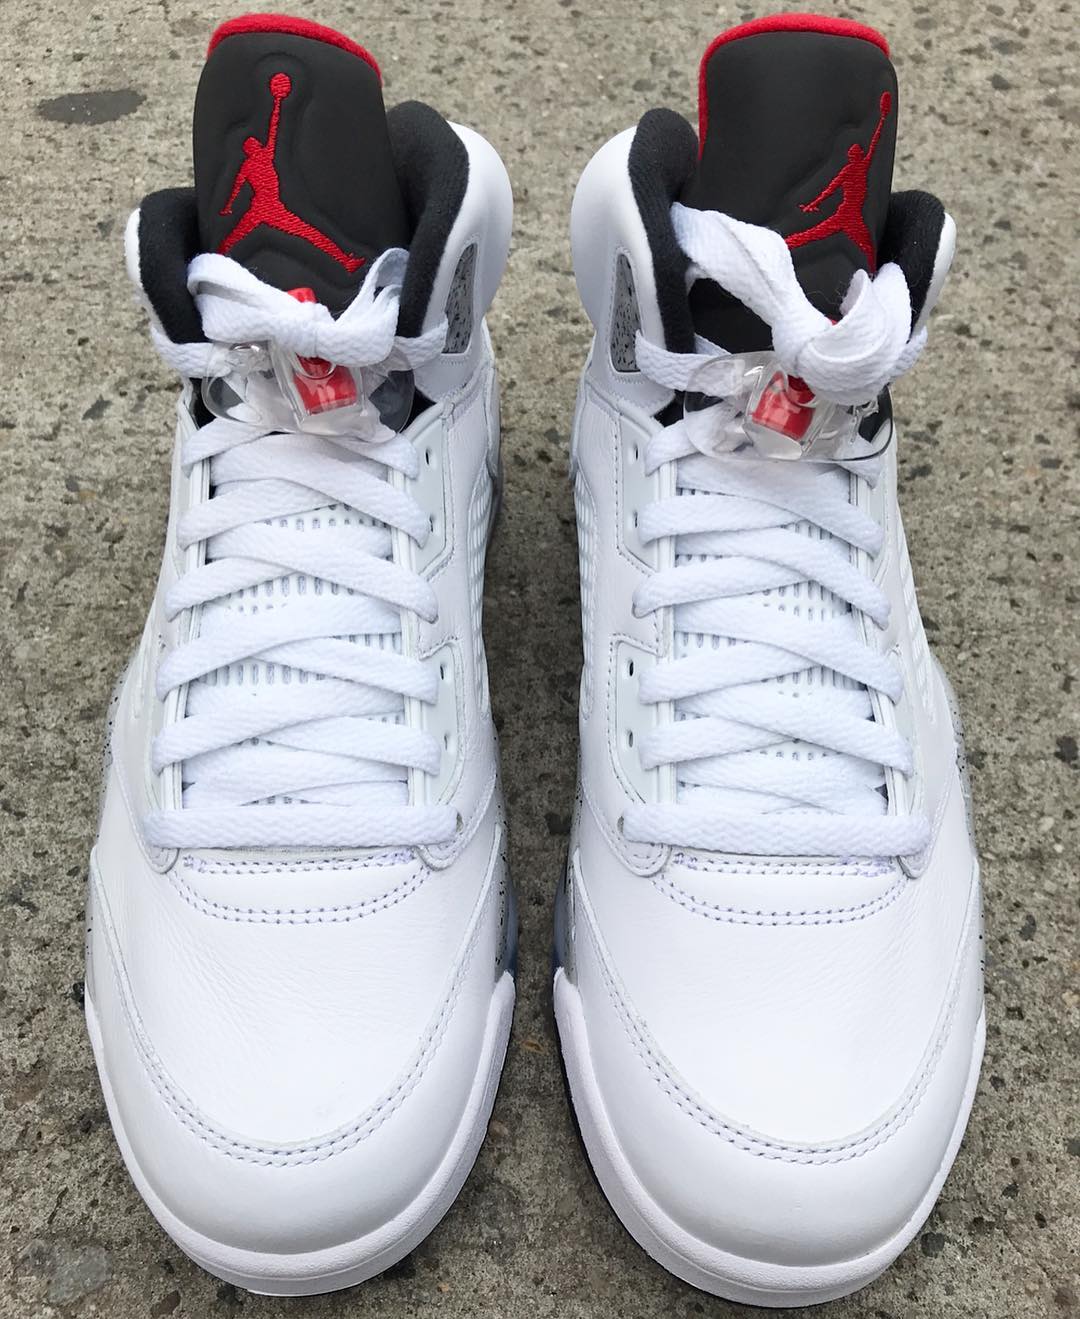 Air Jordan 5 White Cement Release Date Front 136027-104